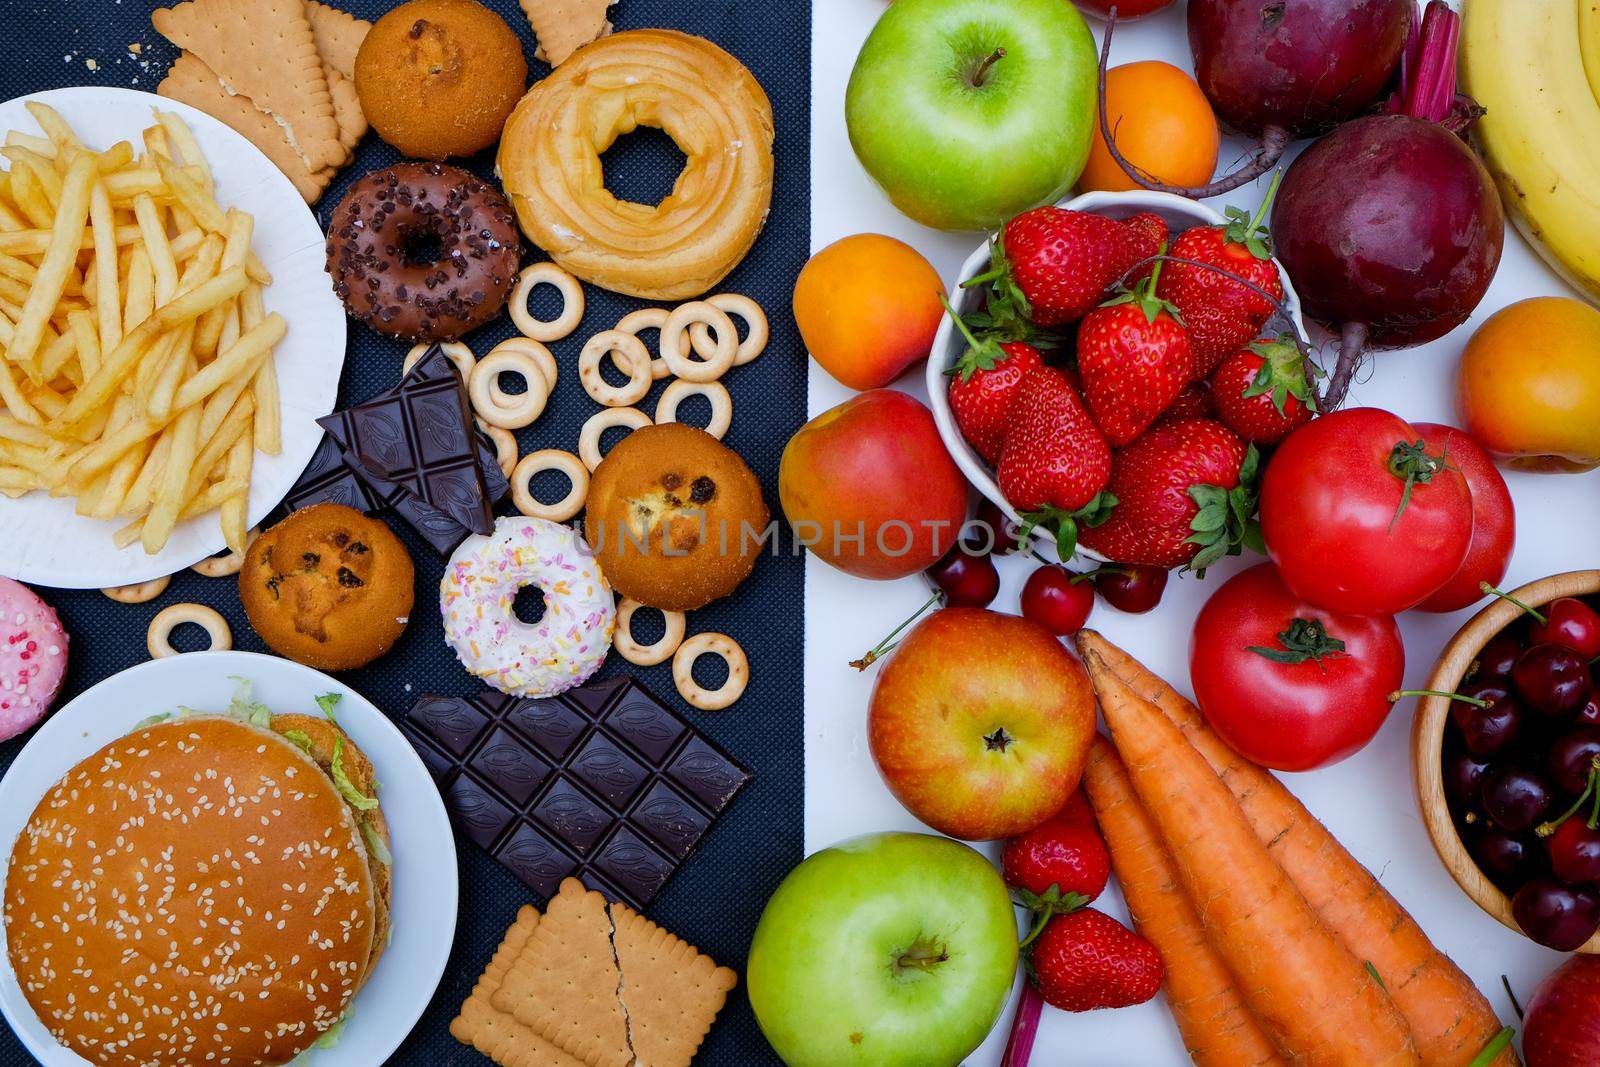 Concept photo of healthy and unhealthy food. Fruits and vegetables vs donuts,sweets and burgers by natus111